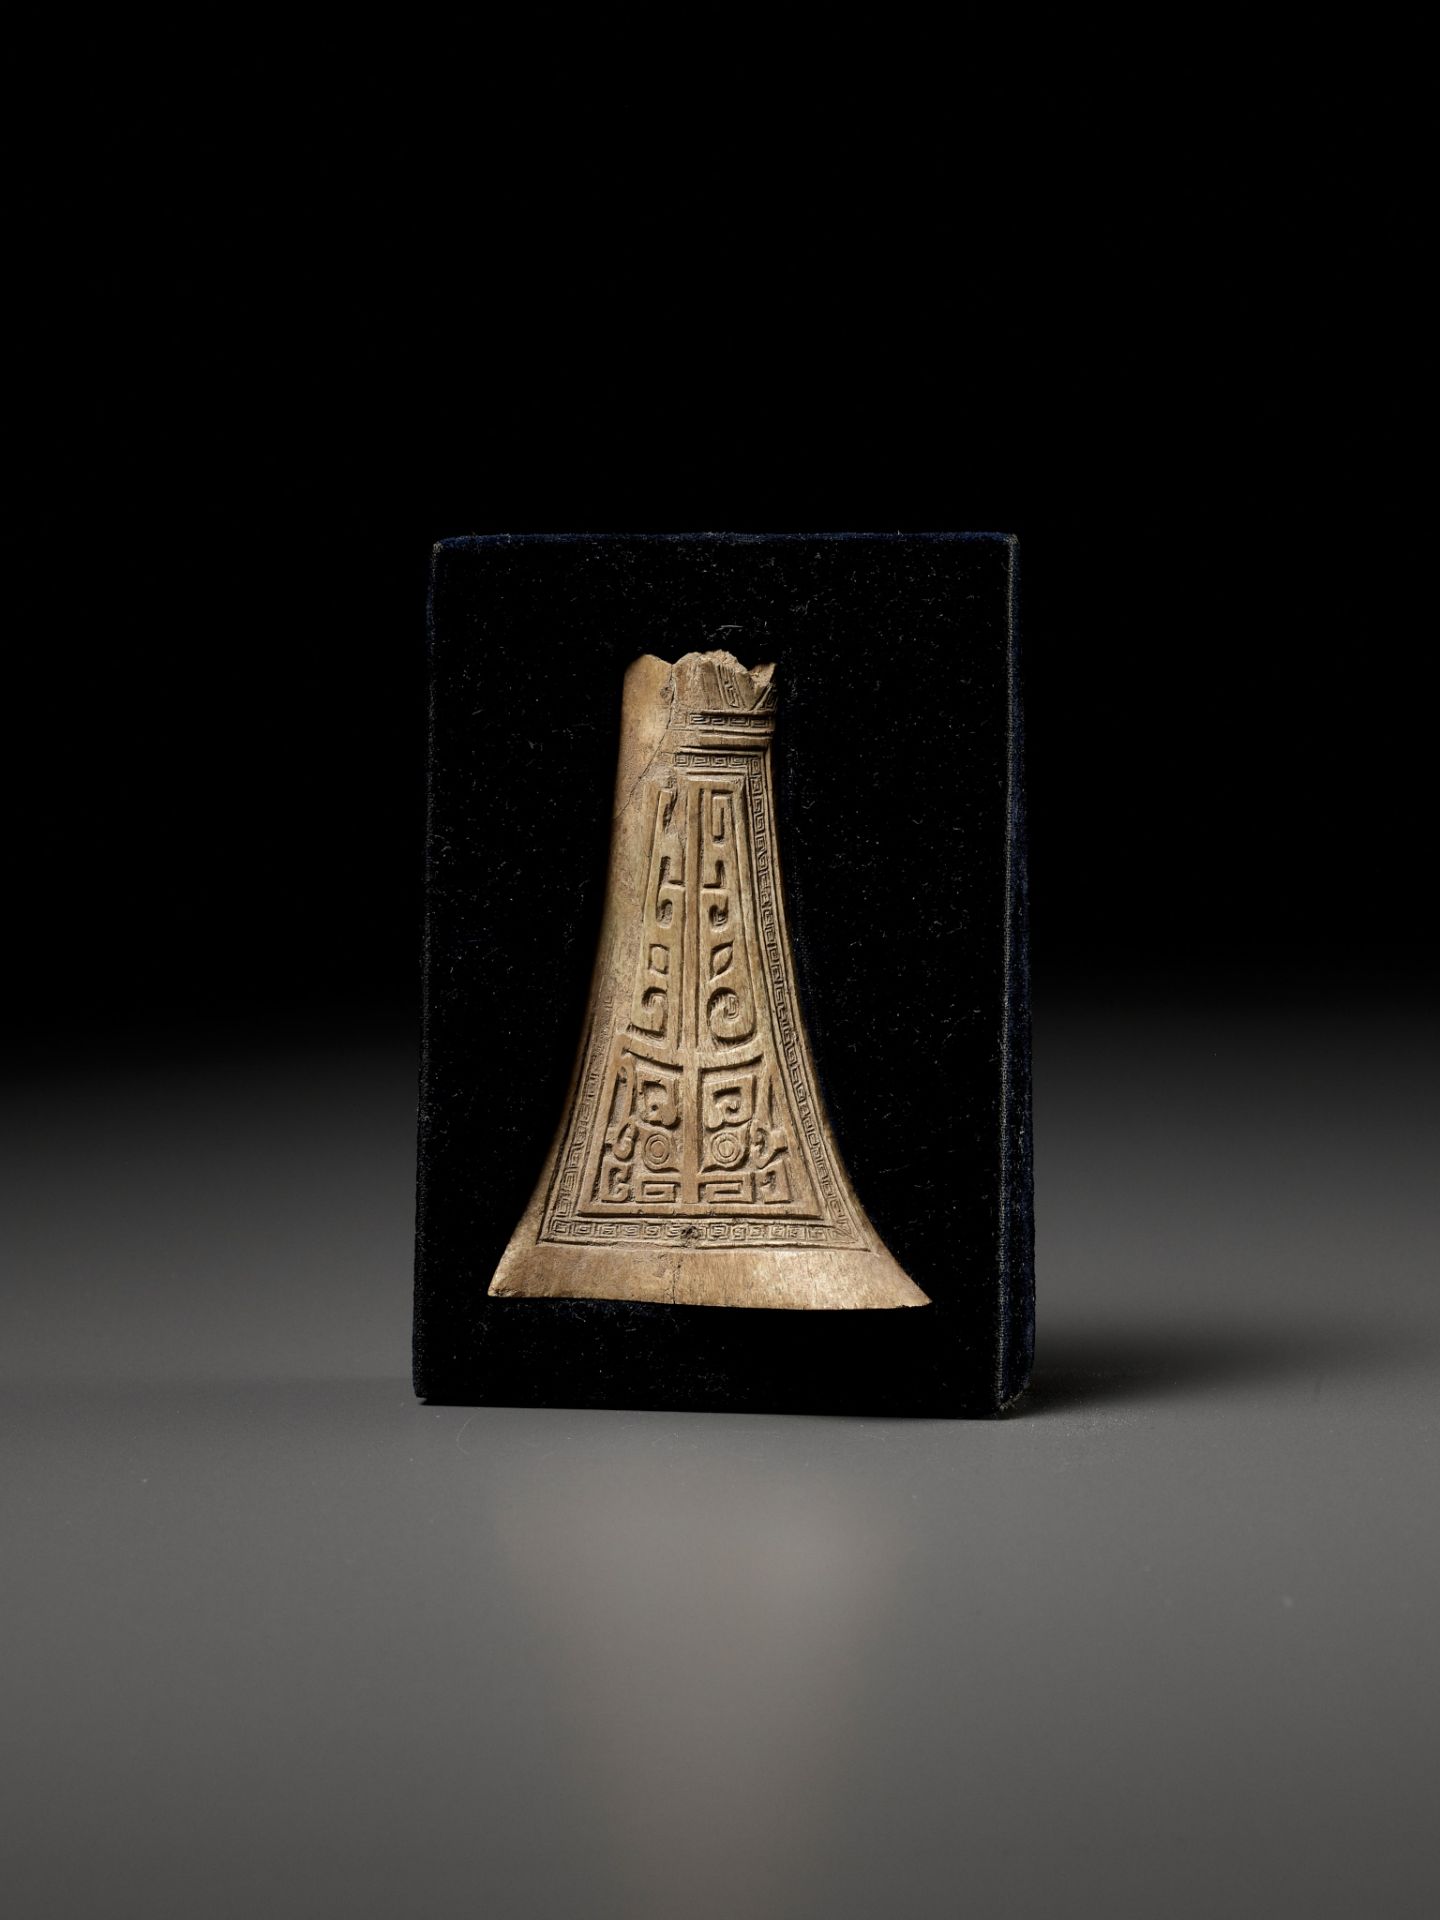 AN ARCHAIC CEREMONIAL BONE CARVING, SHANG DYNASTY - Image 11 of 16